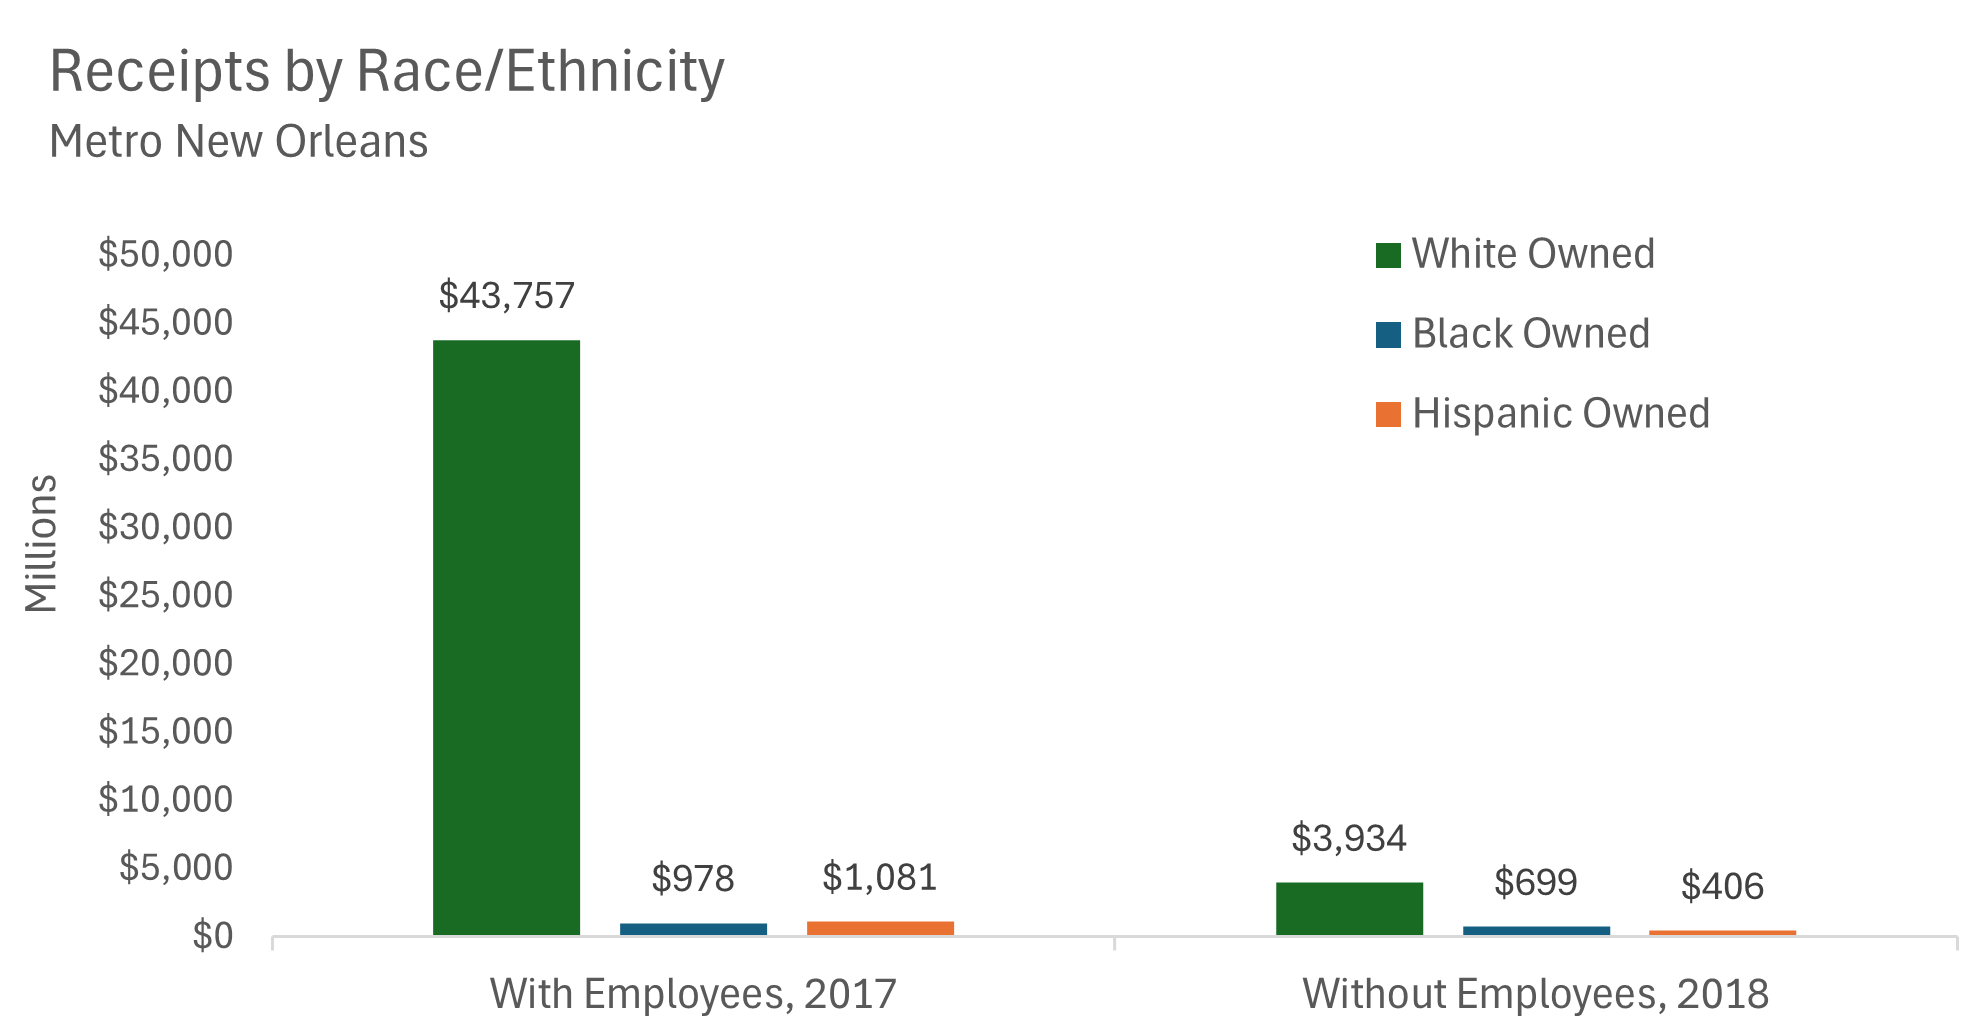 Share of Receipts by Race/Ethnicity